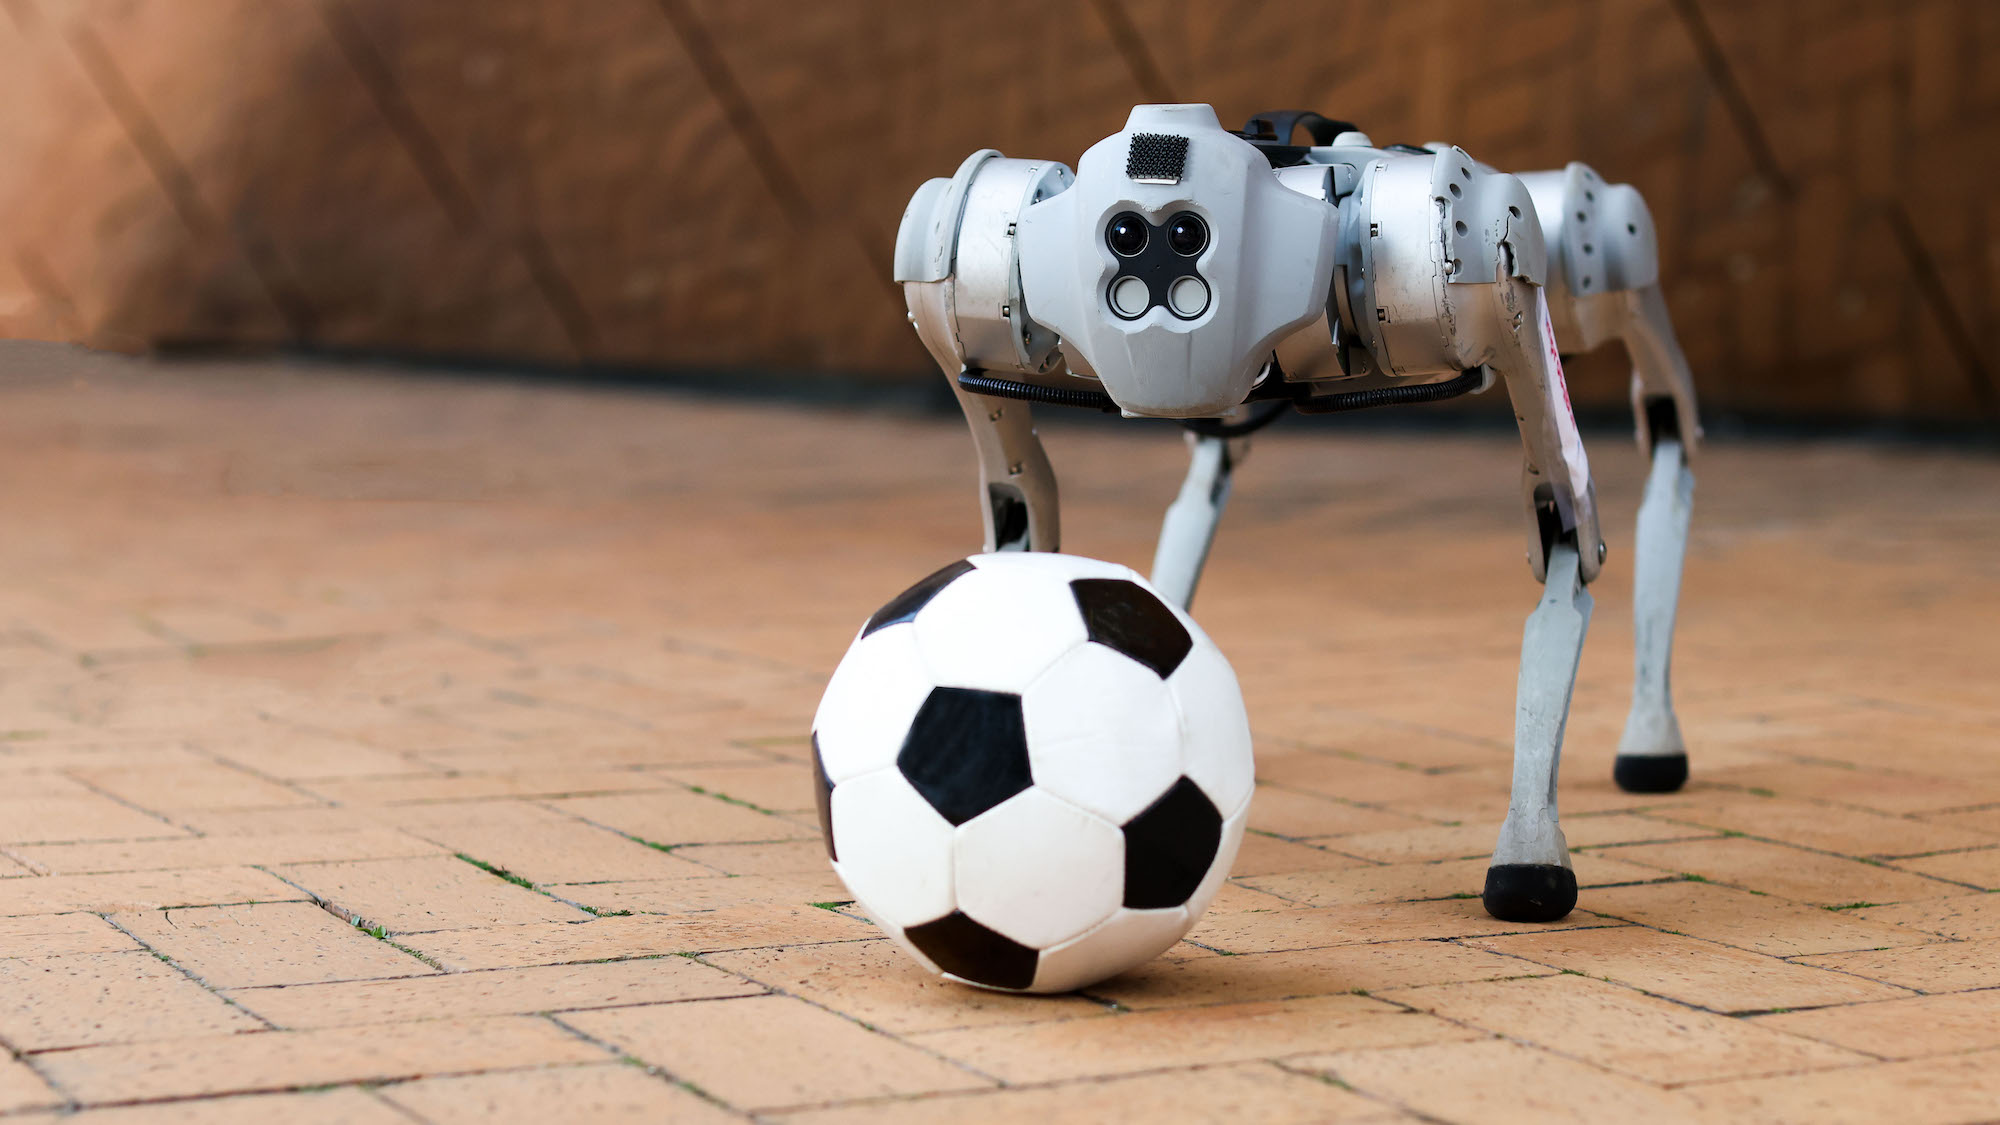 MIT’s soccer-playing robot dog is no Messi, but could one day help save lives